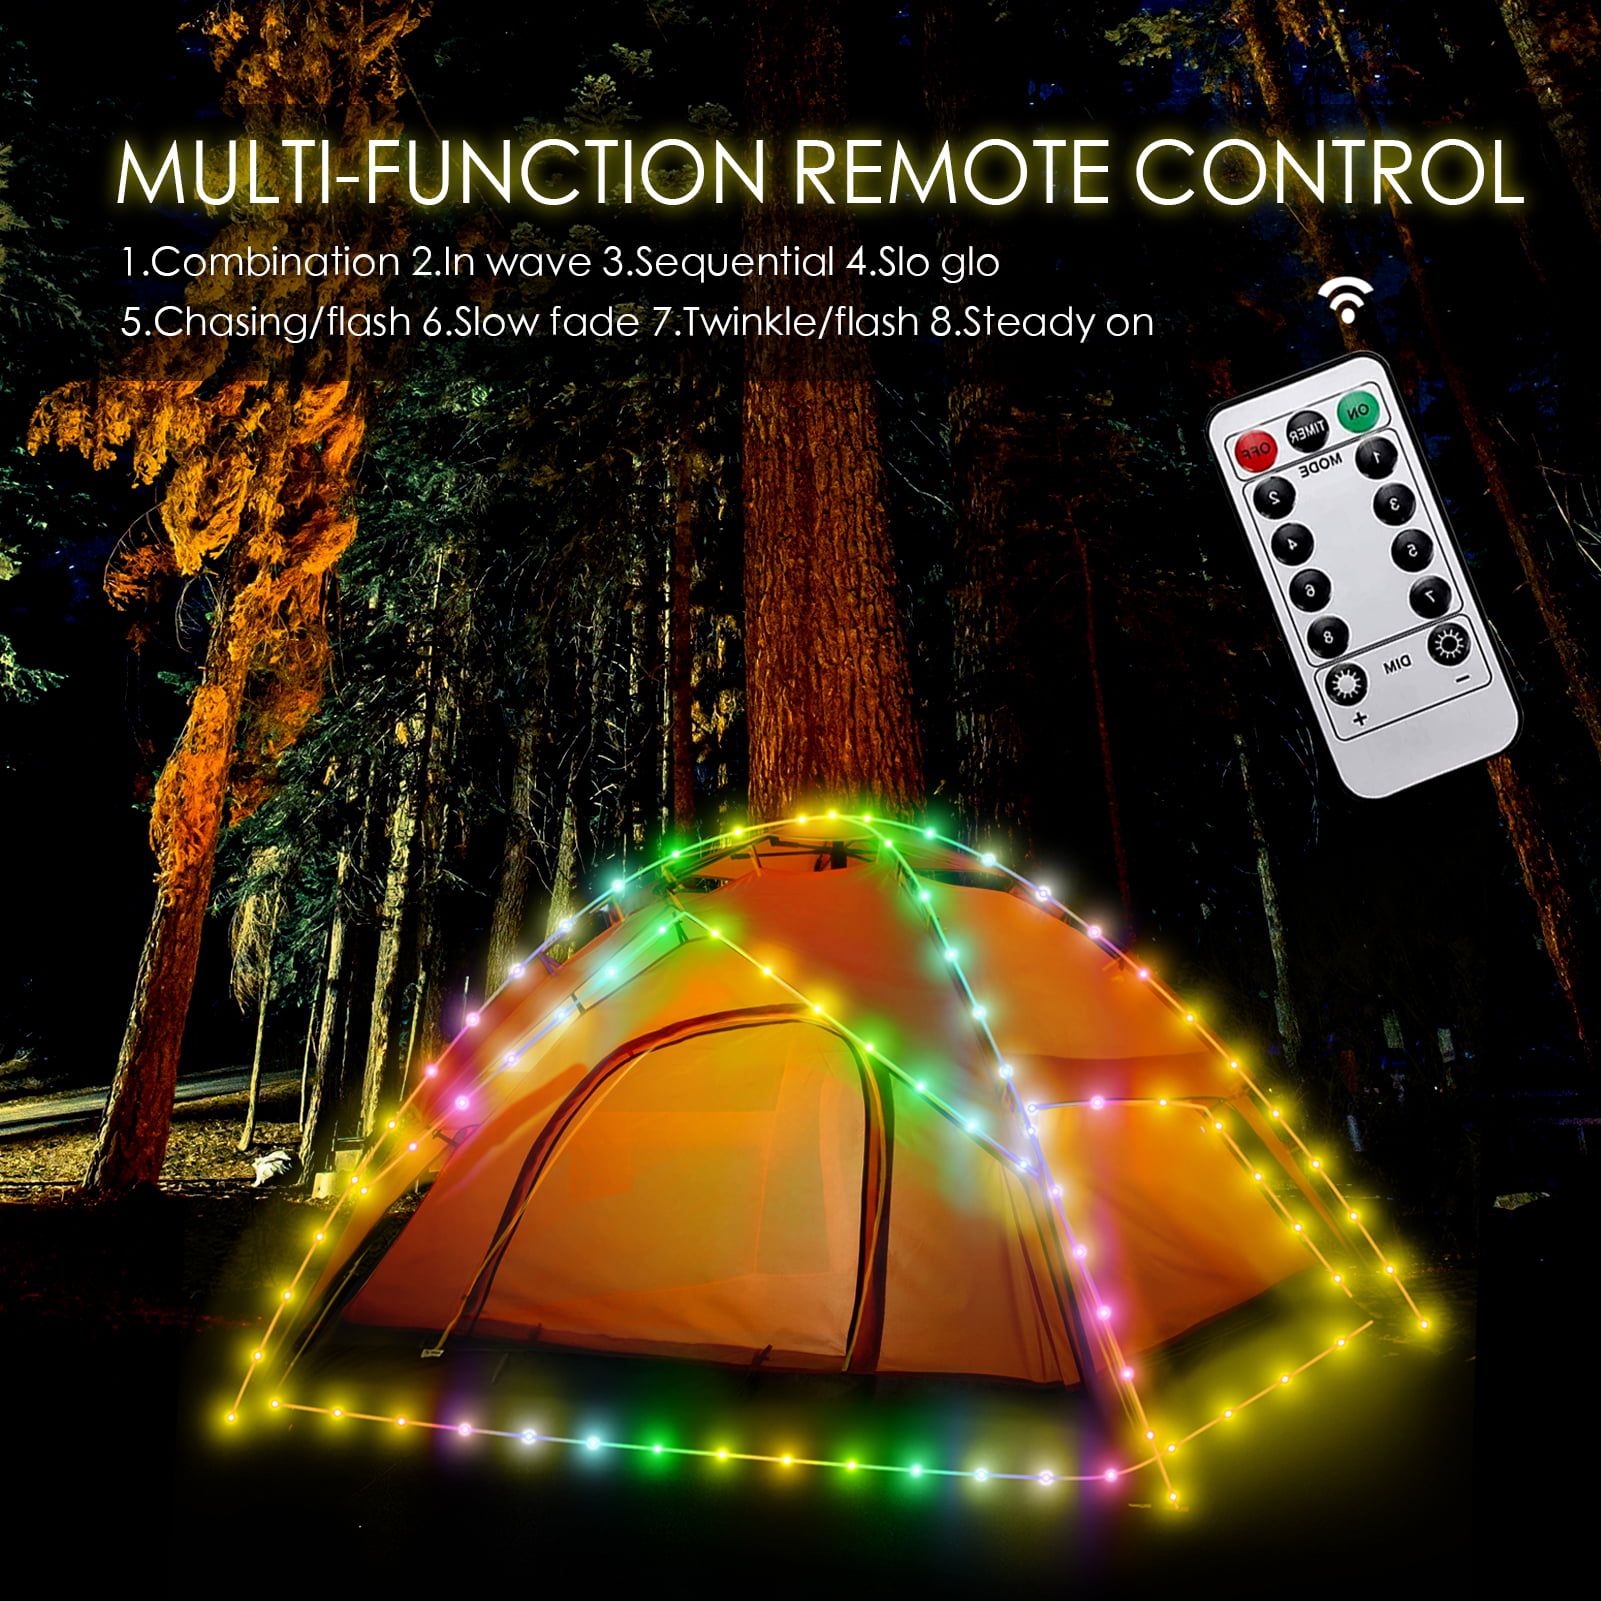 Camping Tent String Lights, 17 Colors 7 Flashing Modes LED Decorative Rope  Lights Battery Operated with Remote Control, Waterproof Camping Tent Light